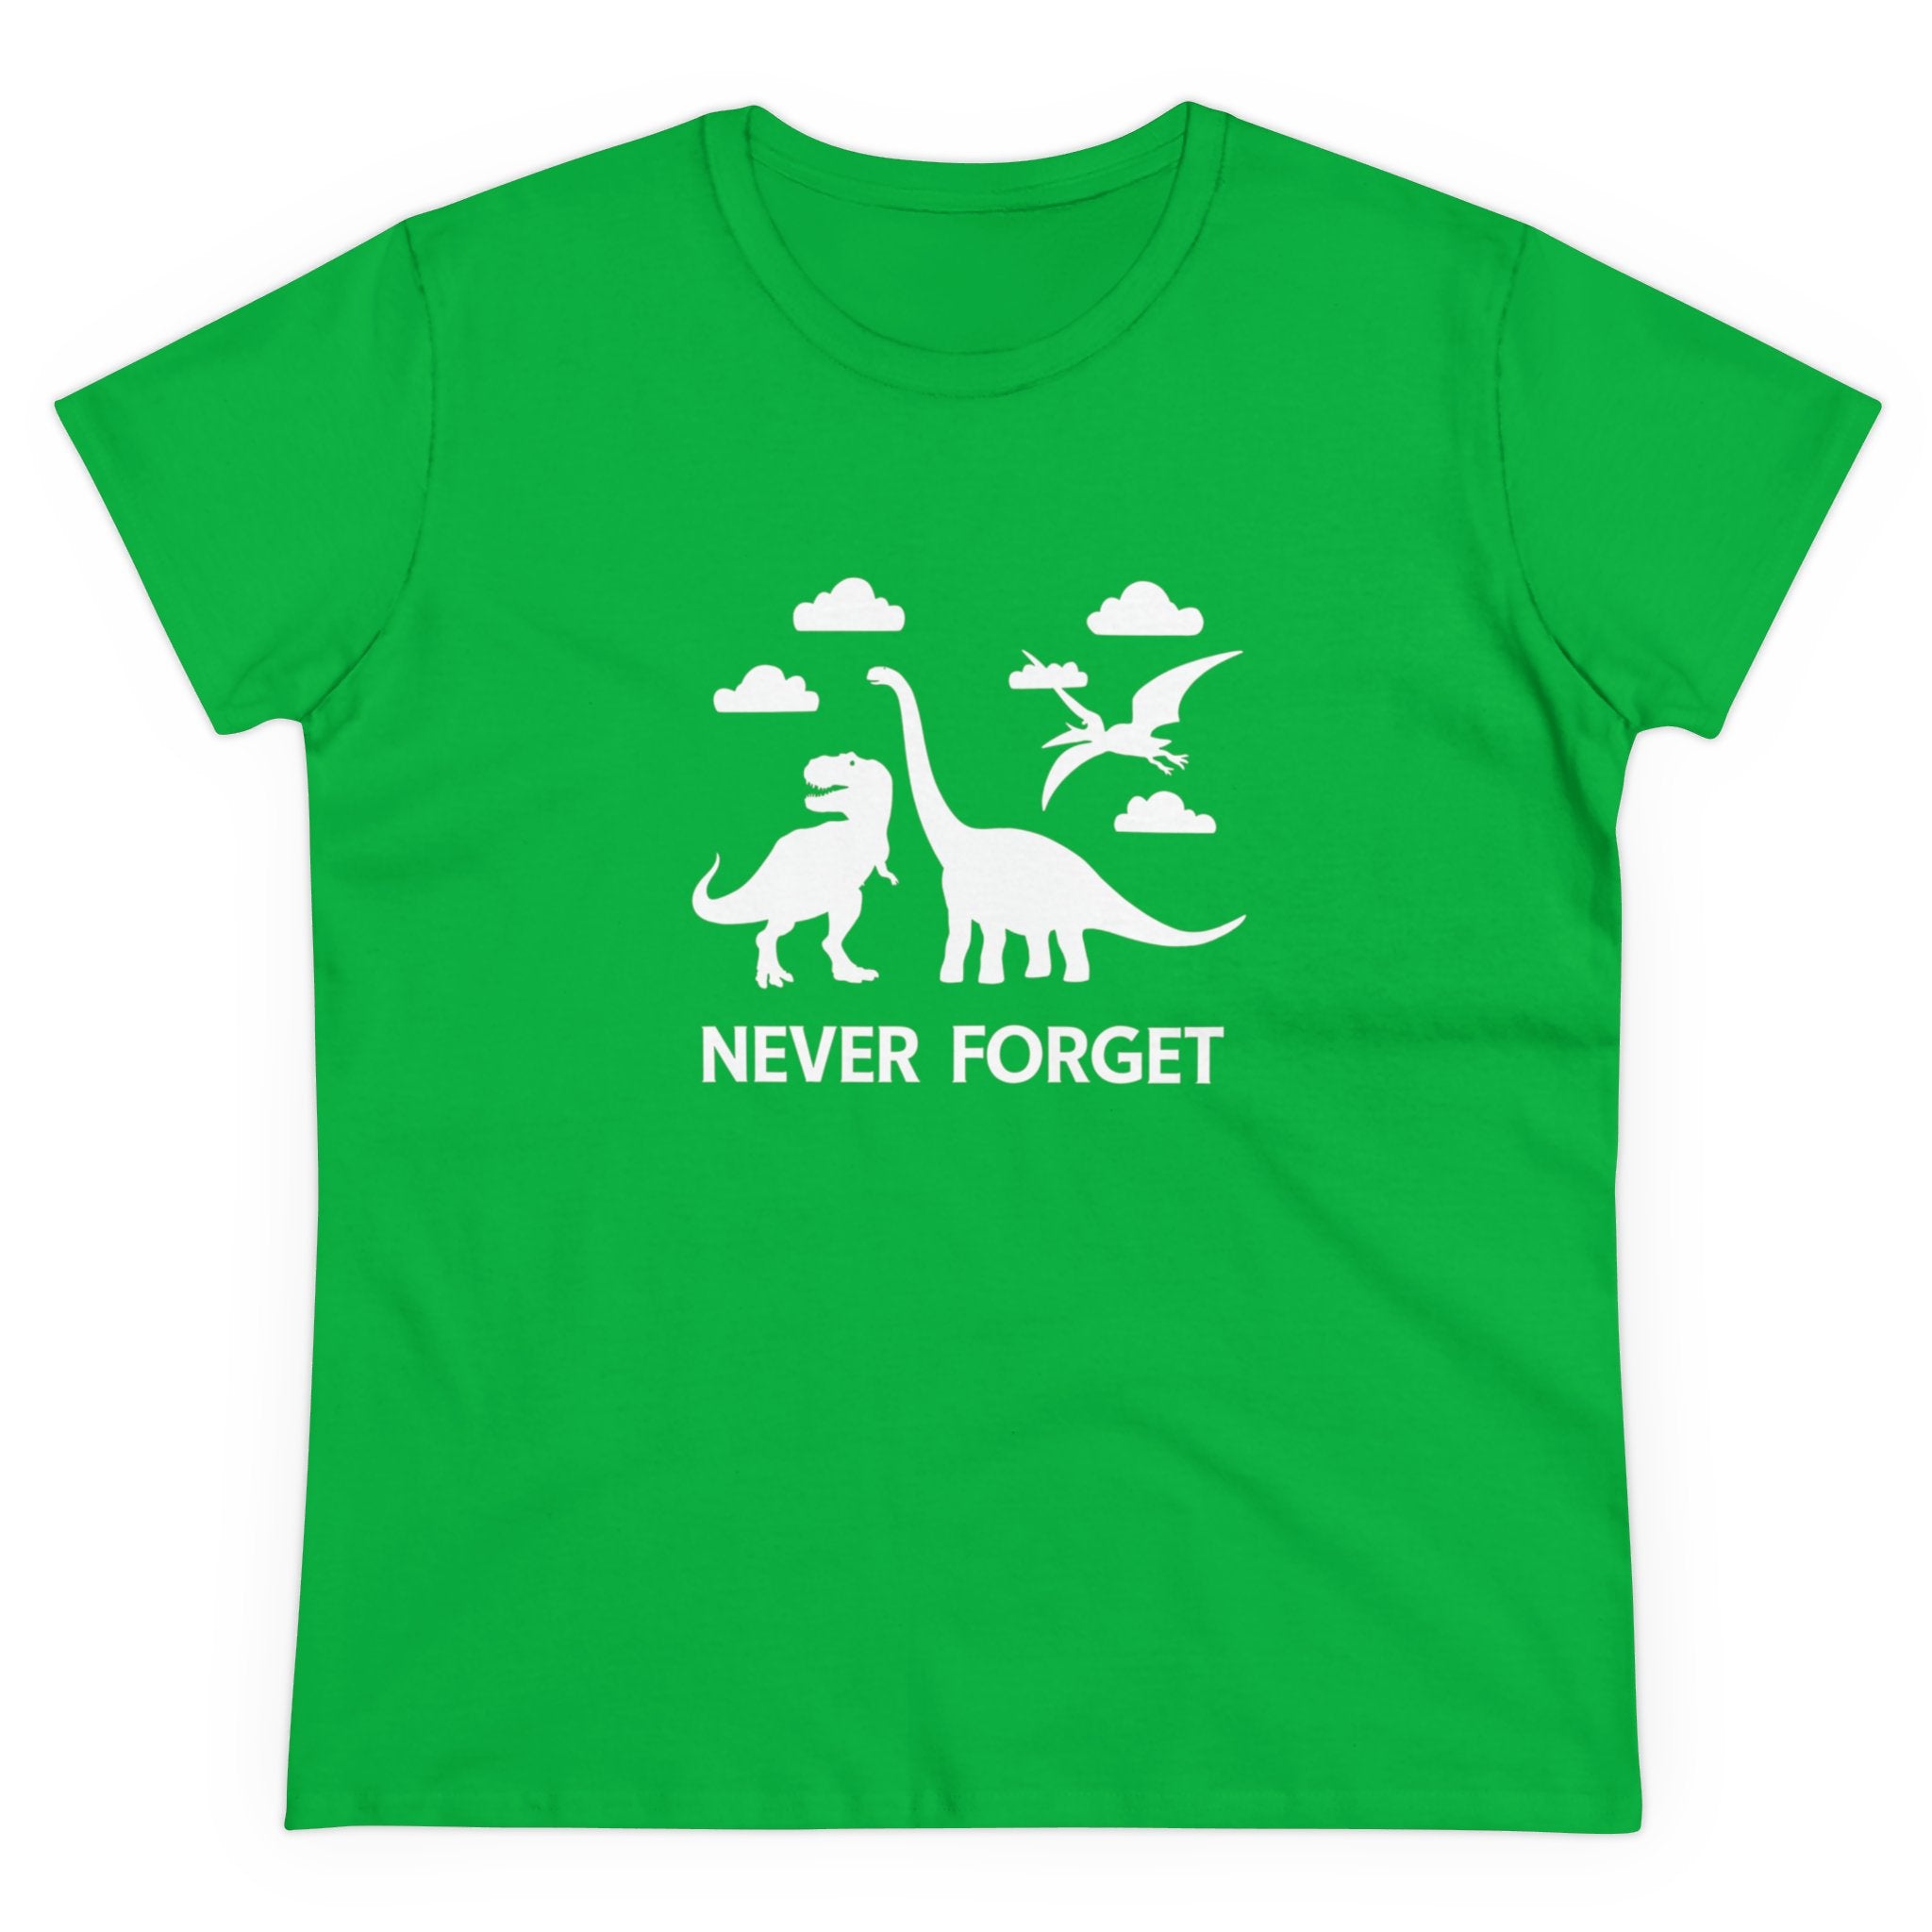 Soft cotton green T-shirt featuring white silhouette illustrations of dinosaurs and clouds above the text "NEVER FORGET." This **Never Forget - Women's Tee** comes with stylish cap sleeves for added flair.